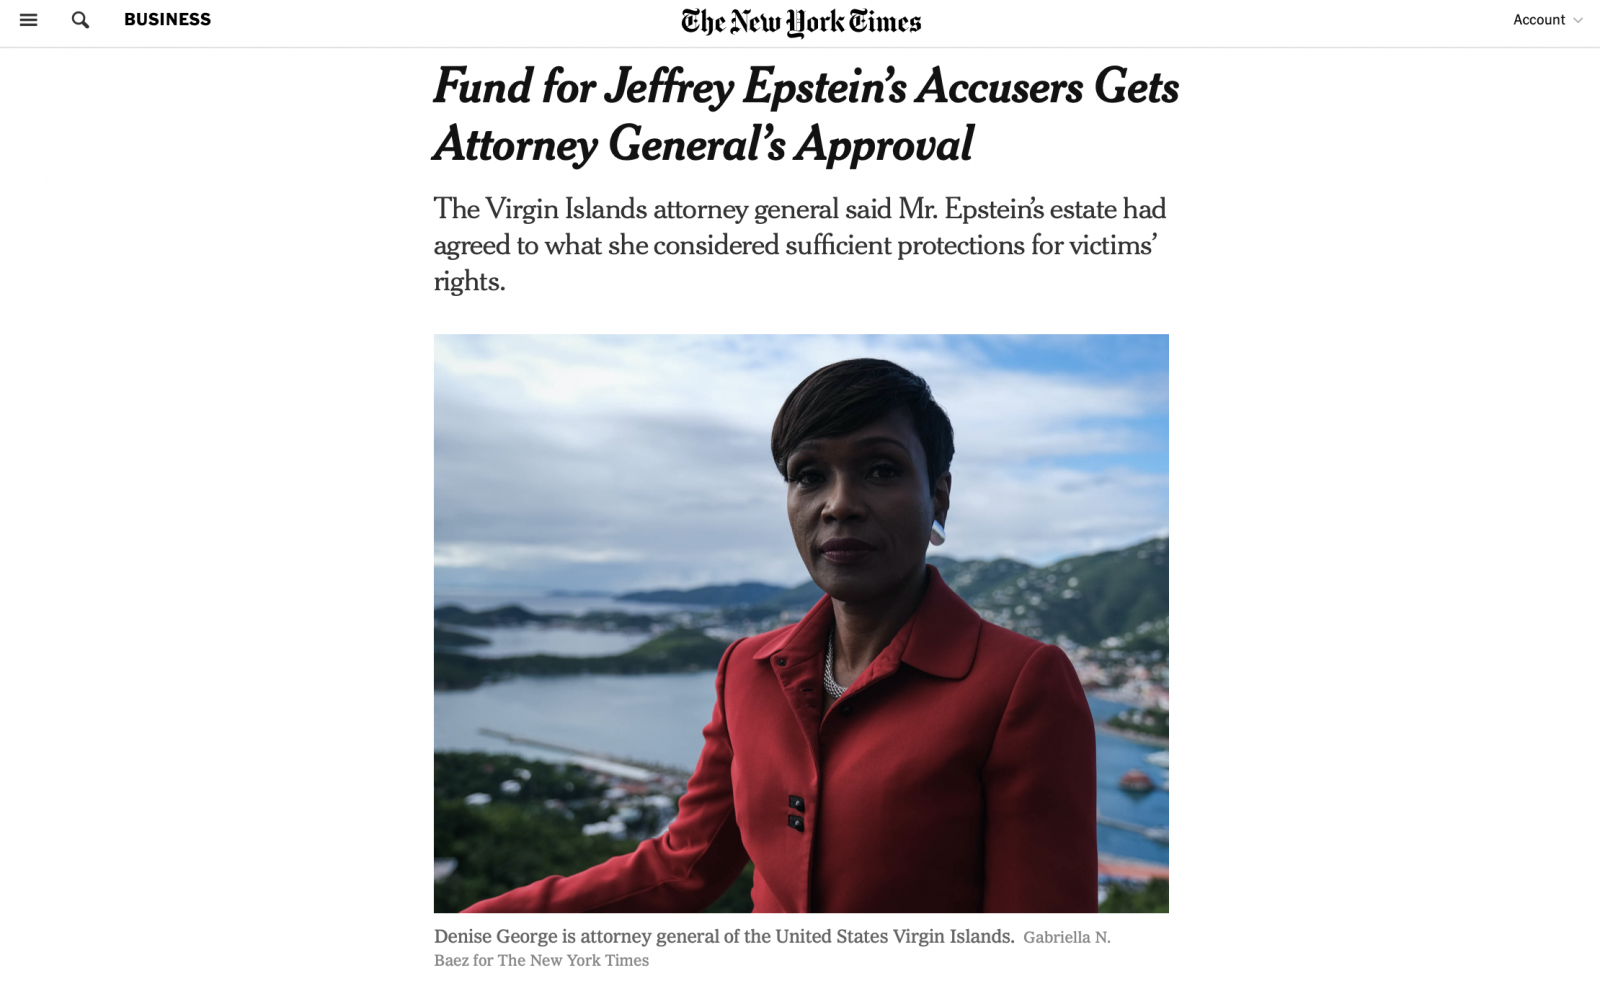 NYT in print: US Virgin Island's General Attorney on the Epstein Case